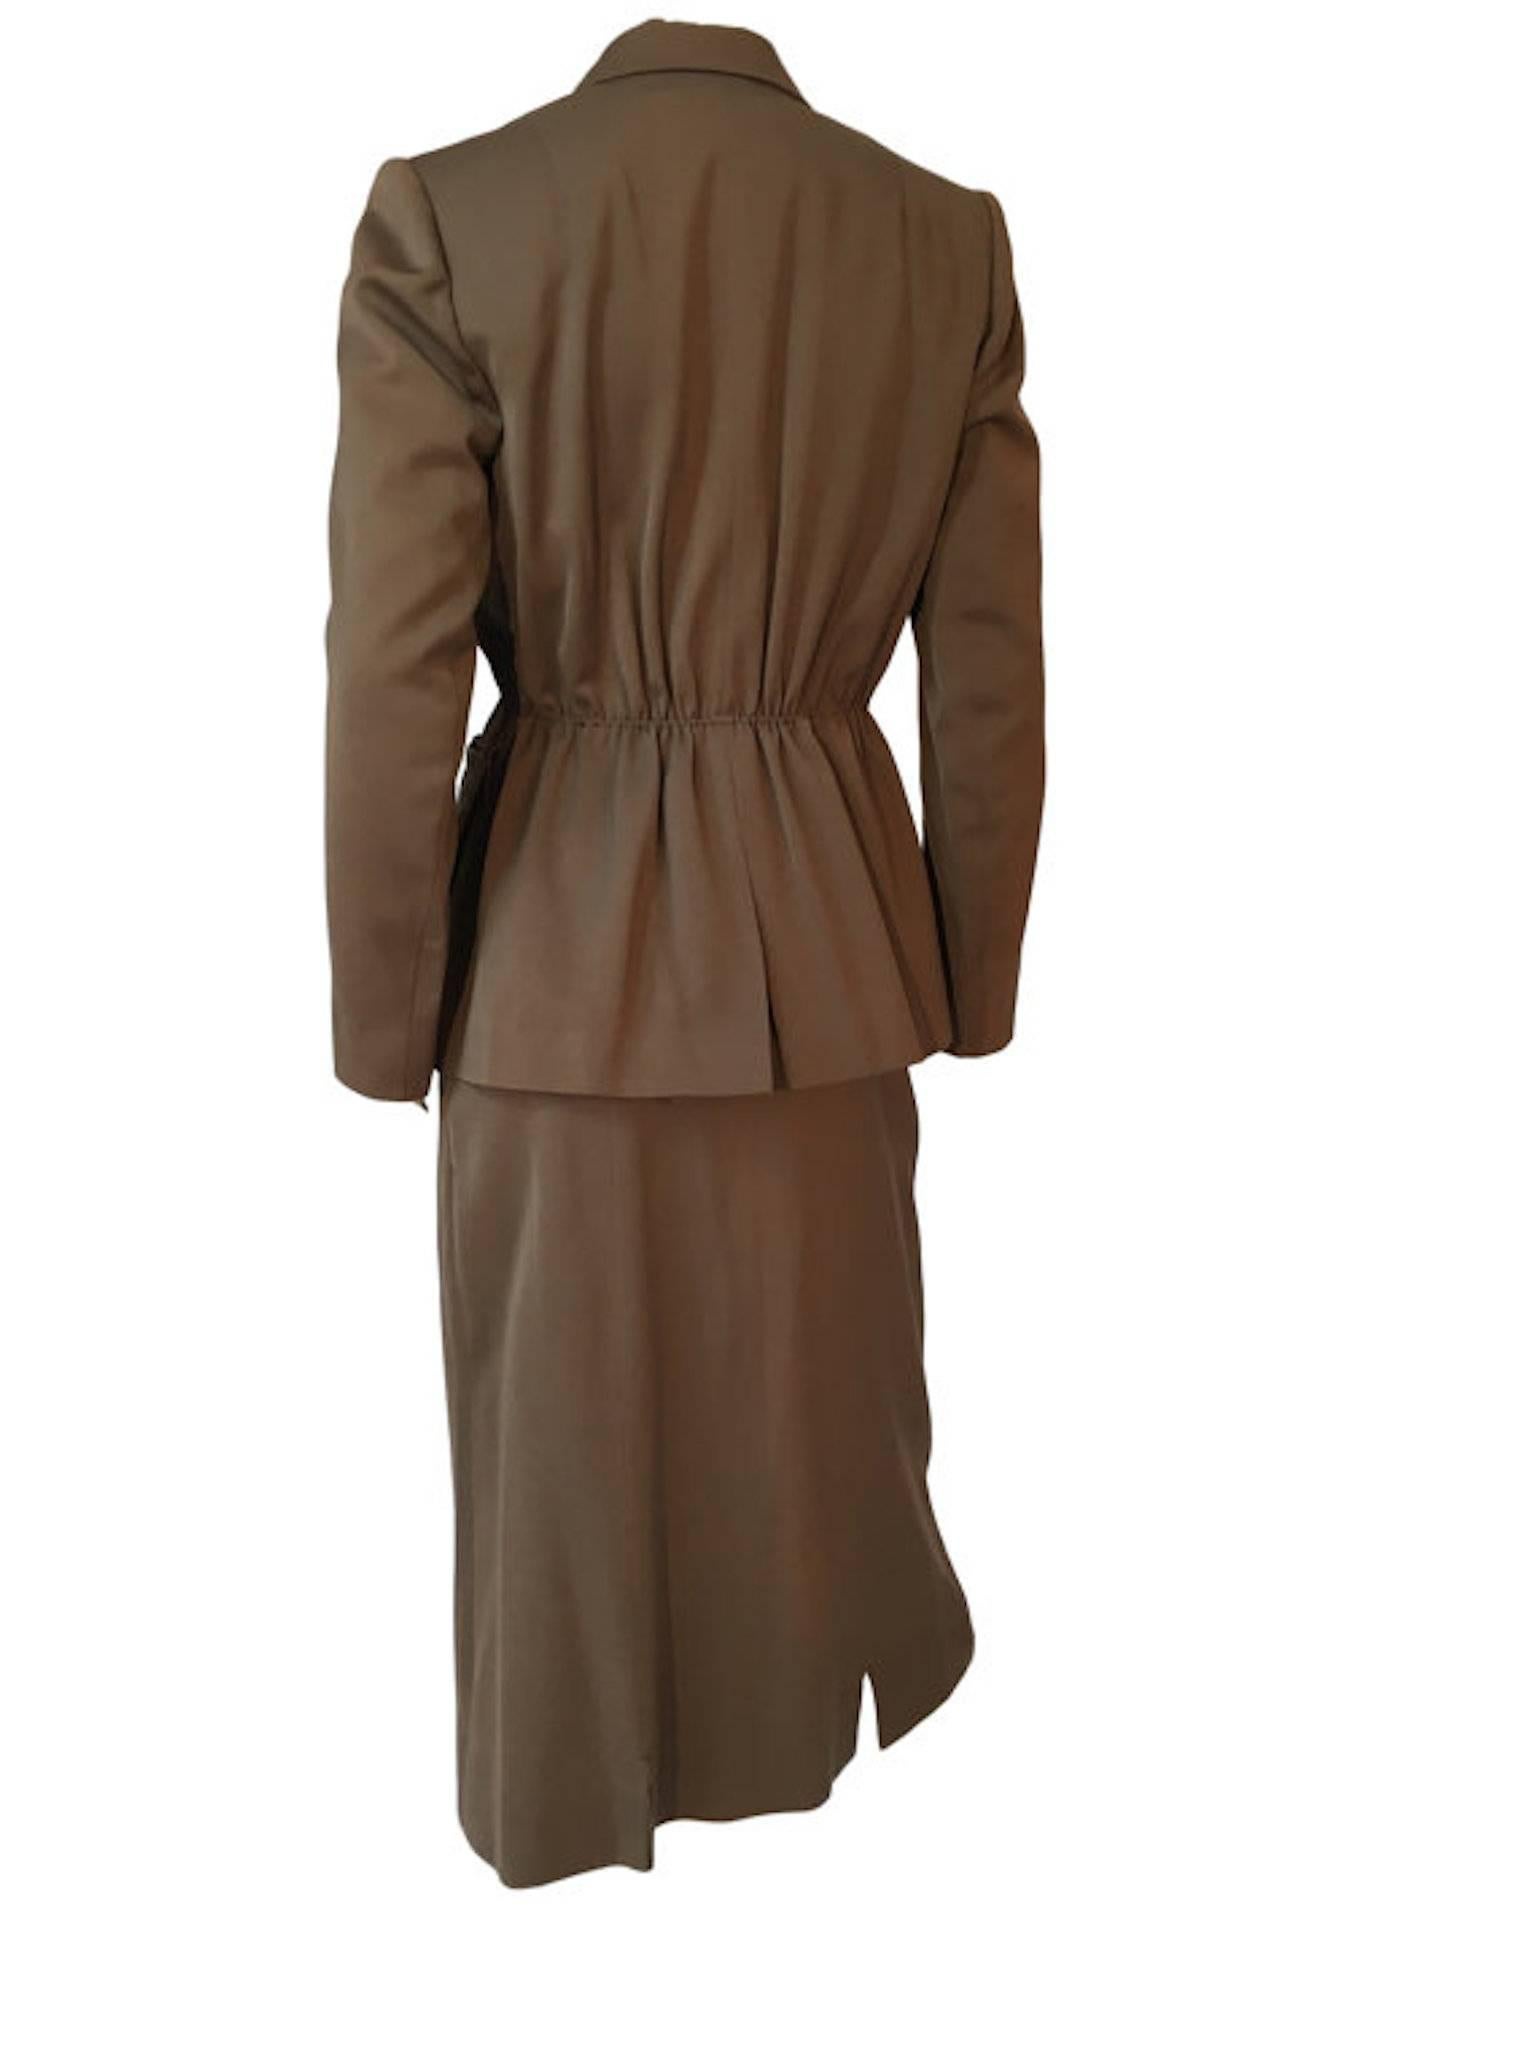 Gilbert for Bests Apparel wool skirt suit, beautifully tailored jacket with interesting pocket detail. Structured sharp shoulders and nipped in waist, skirt is calf length and fastens at the sid with original metal zipper and hook/eye closure.

Size